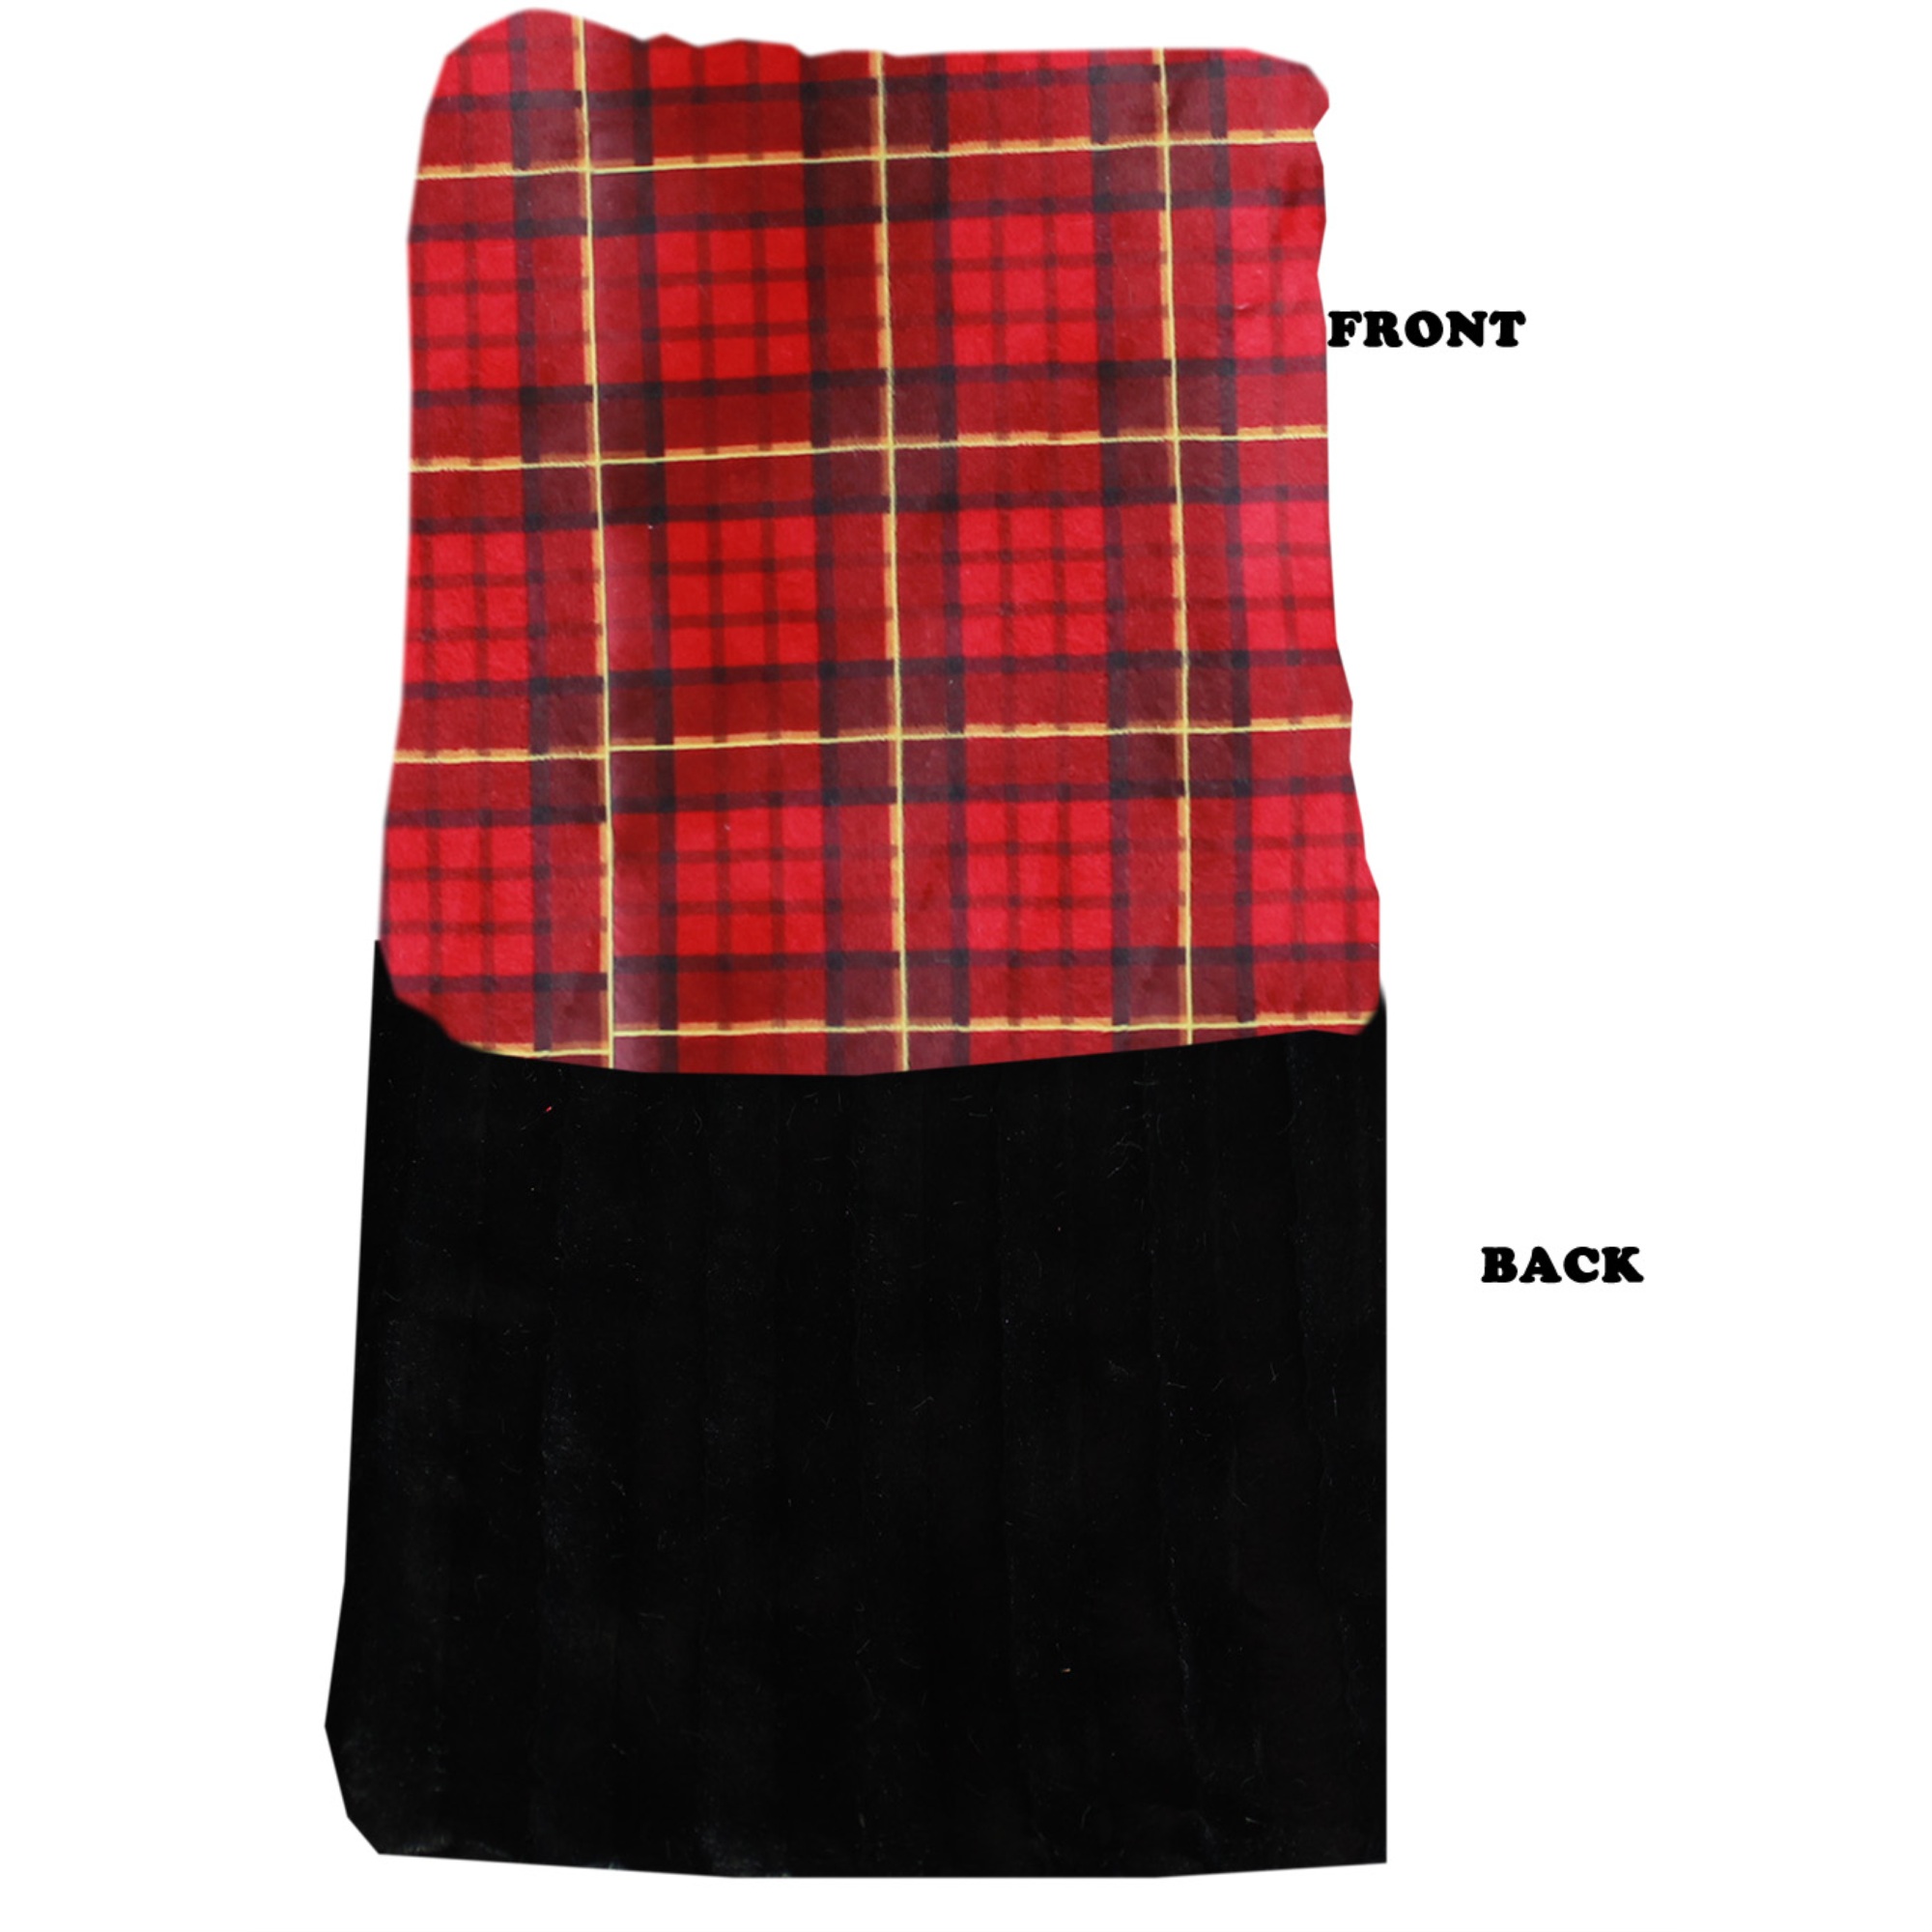 Mirage Pet Products Luxurious Plush Itty Bitty Baby Blanket Red Plaid